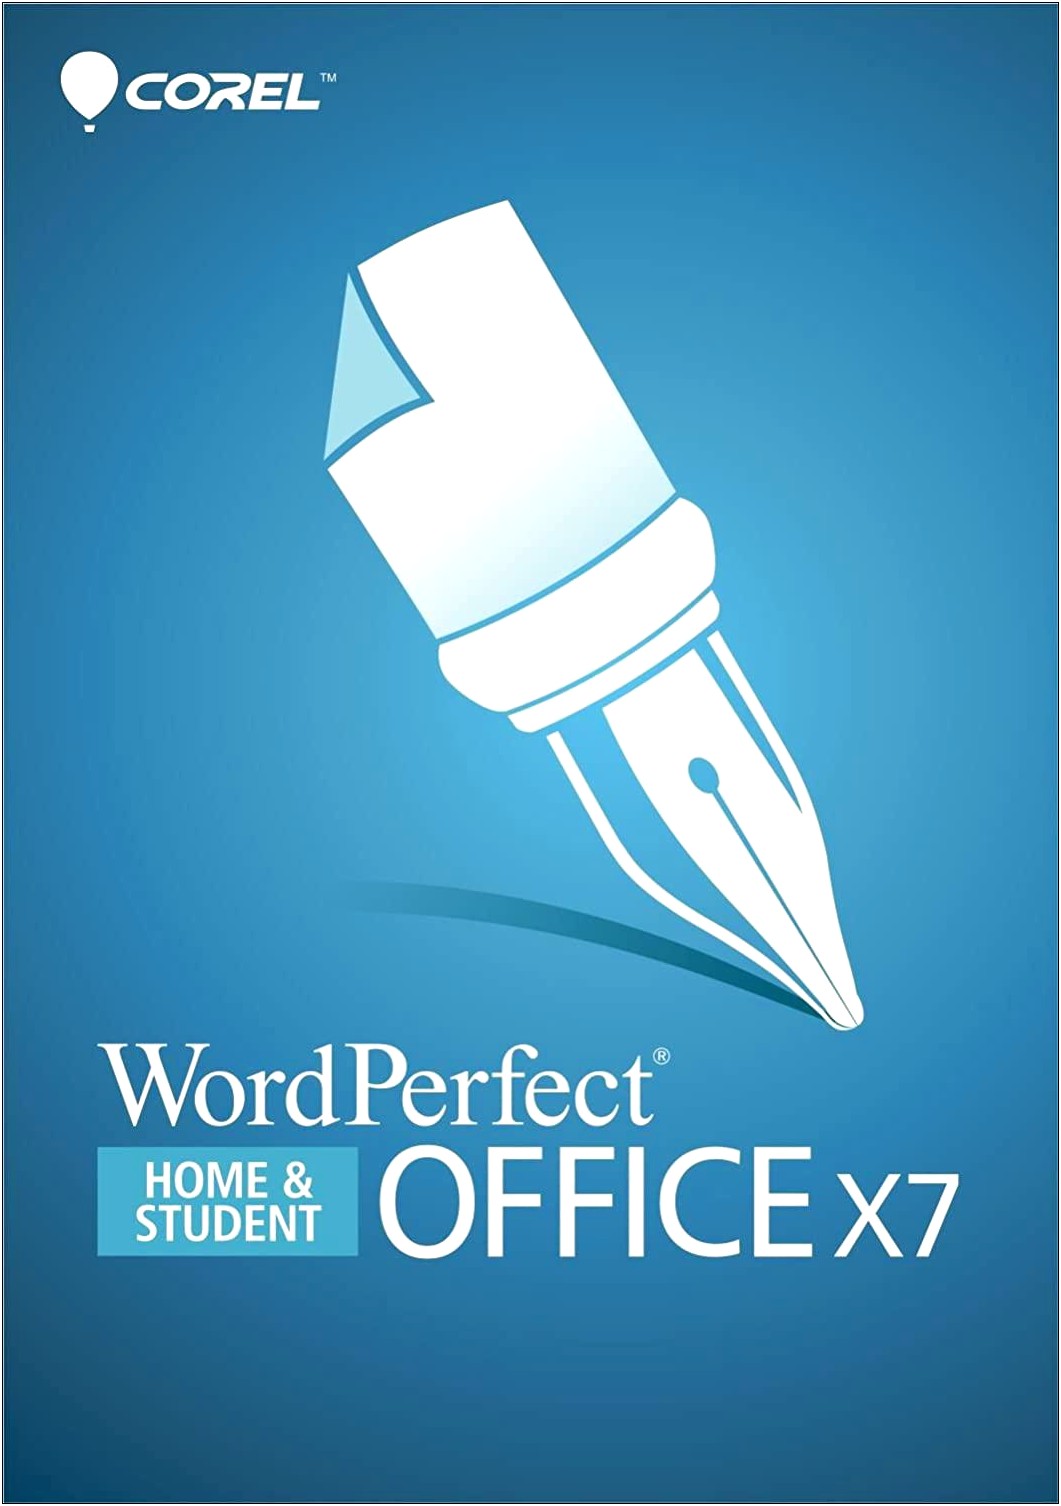 Download A Label Templates To Wordperfect